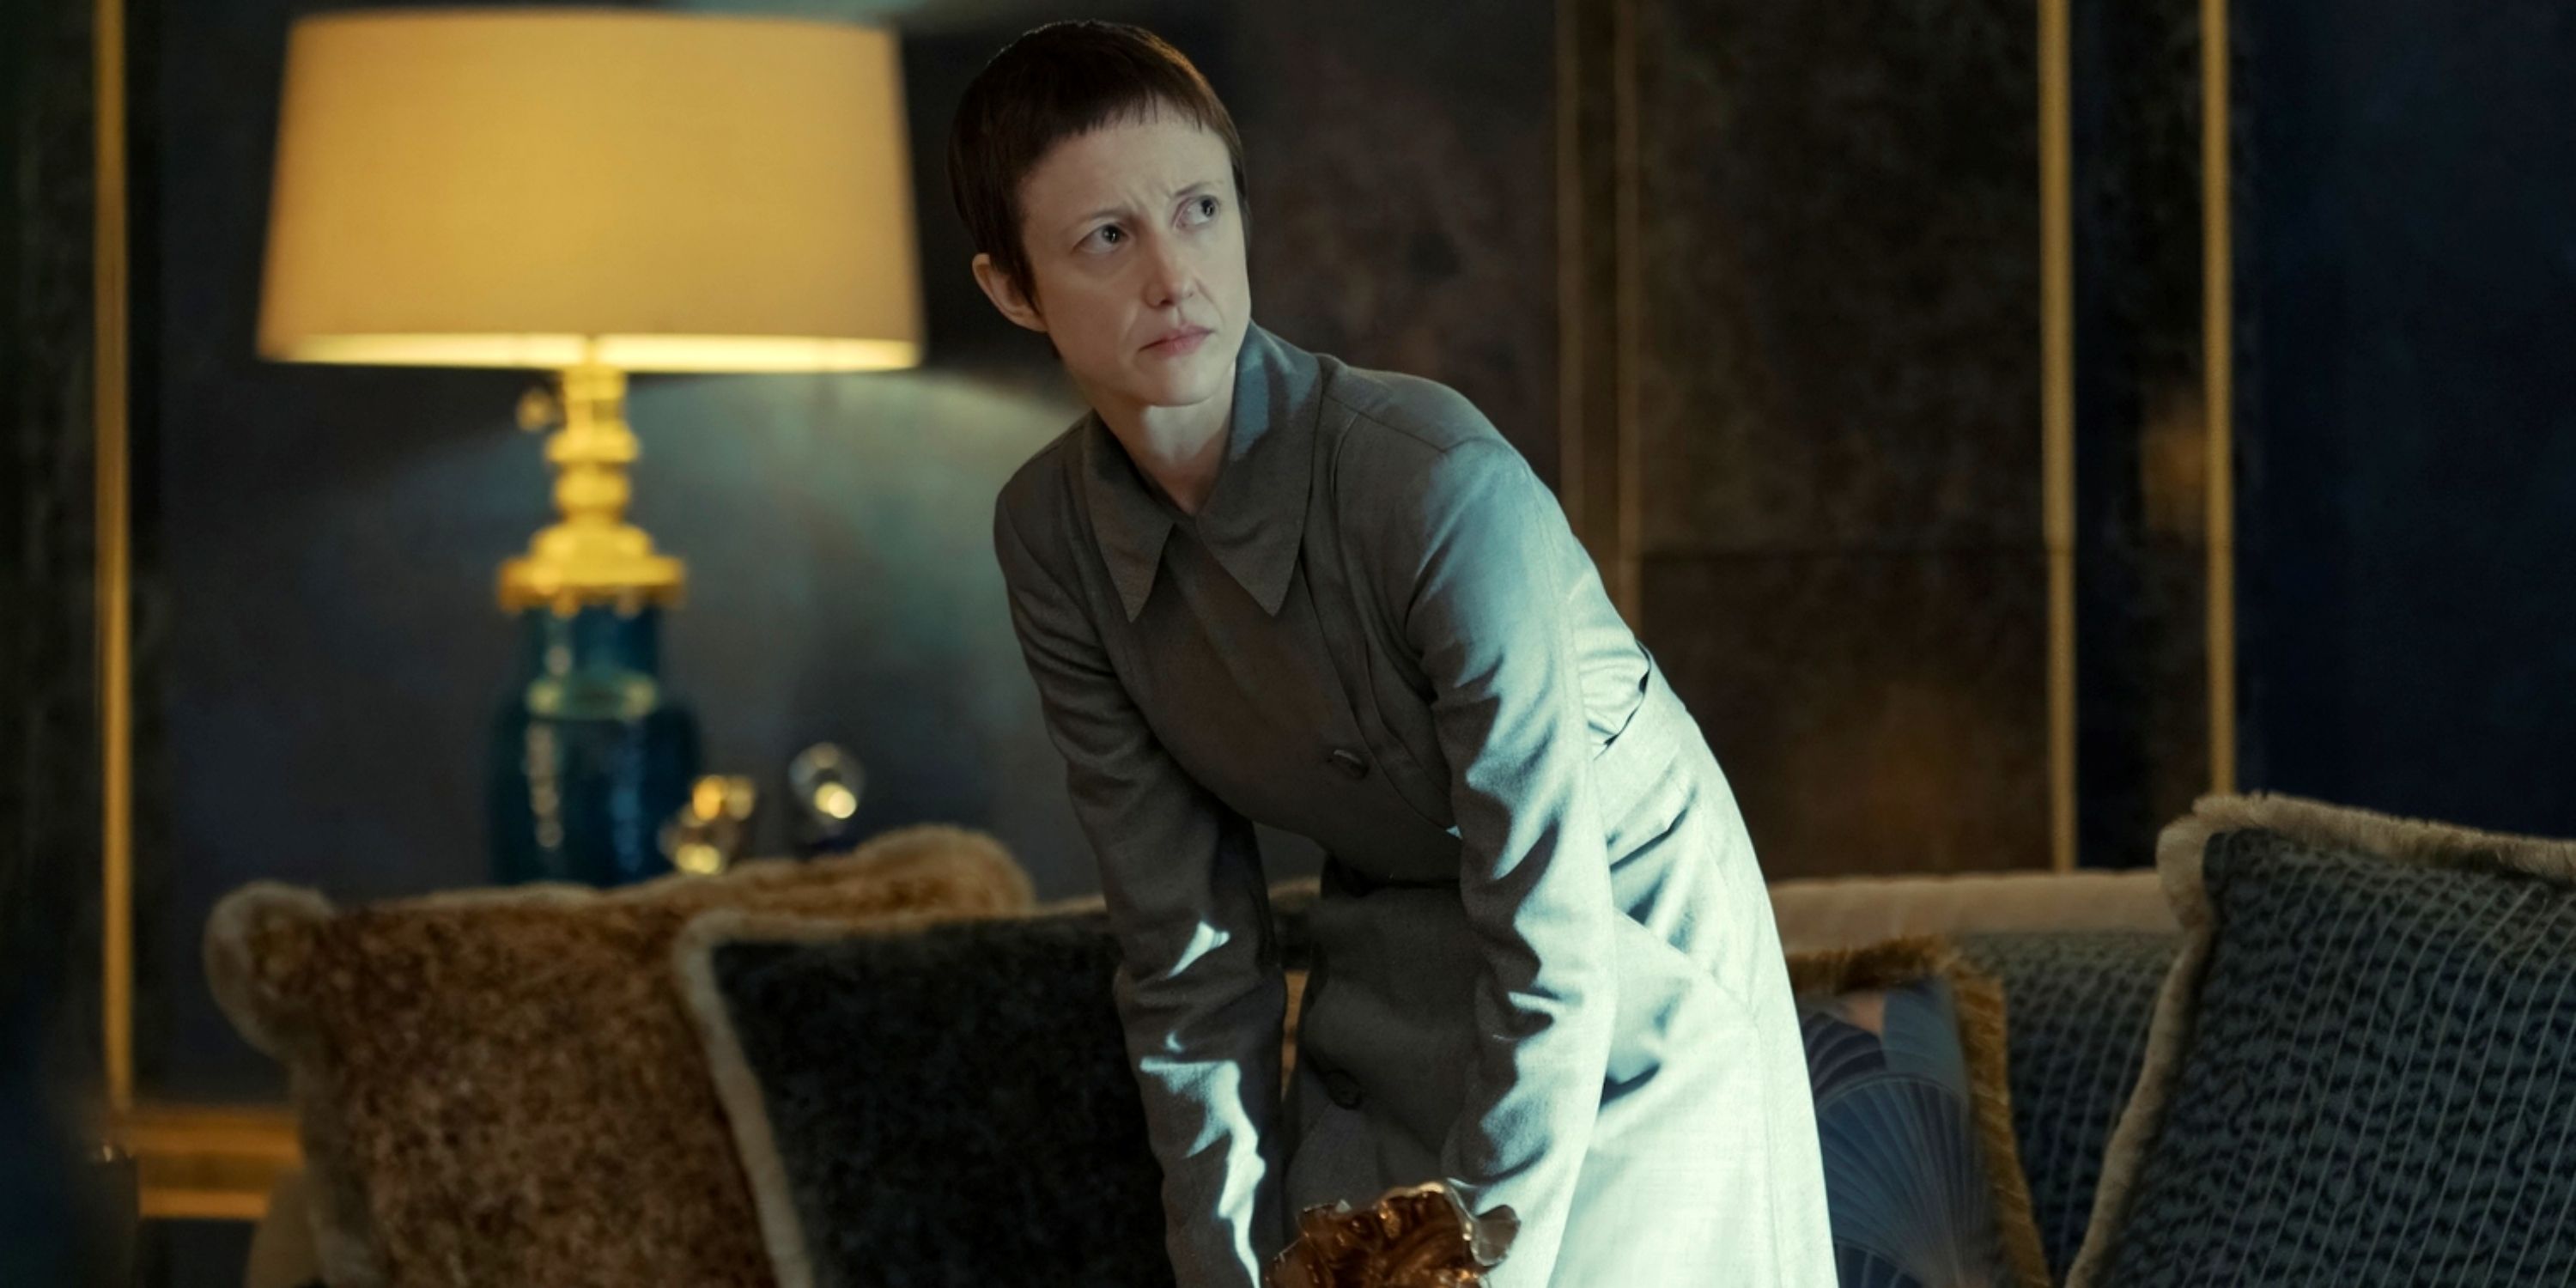 Andrea Riseborough as Agnes bending over in Episode 5 of The Regime